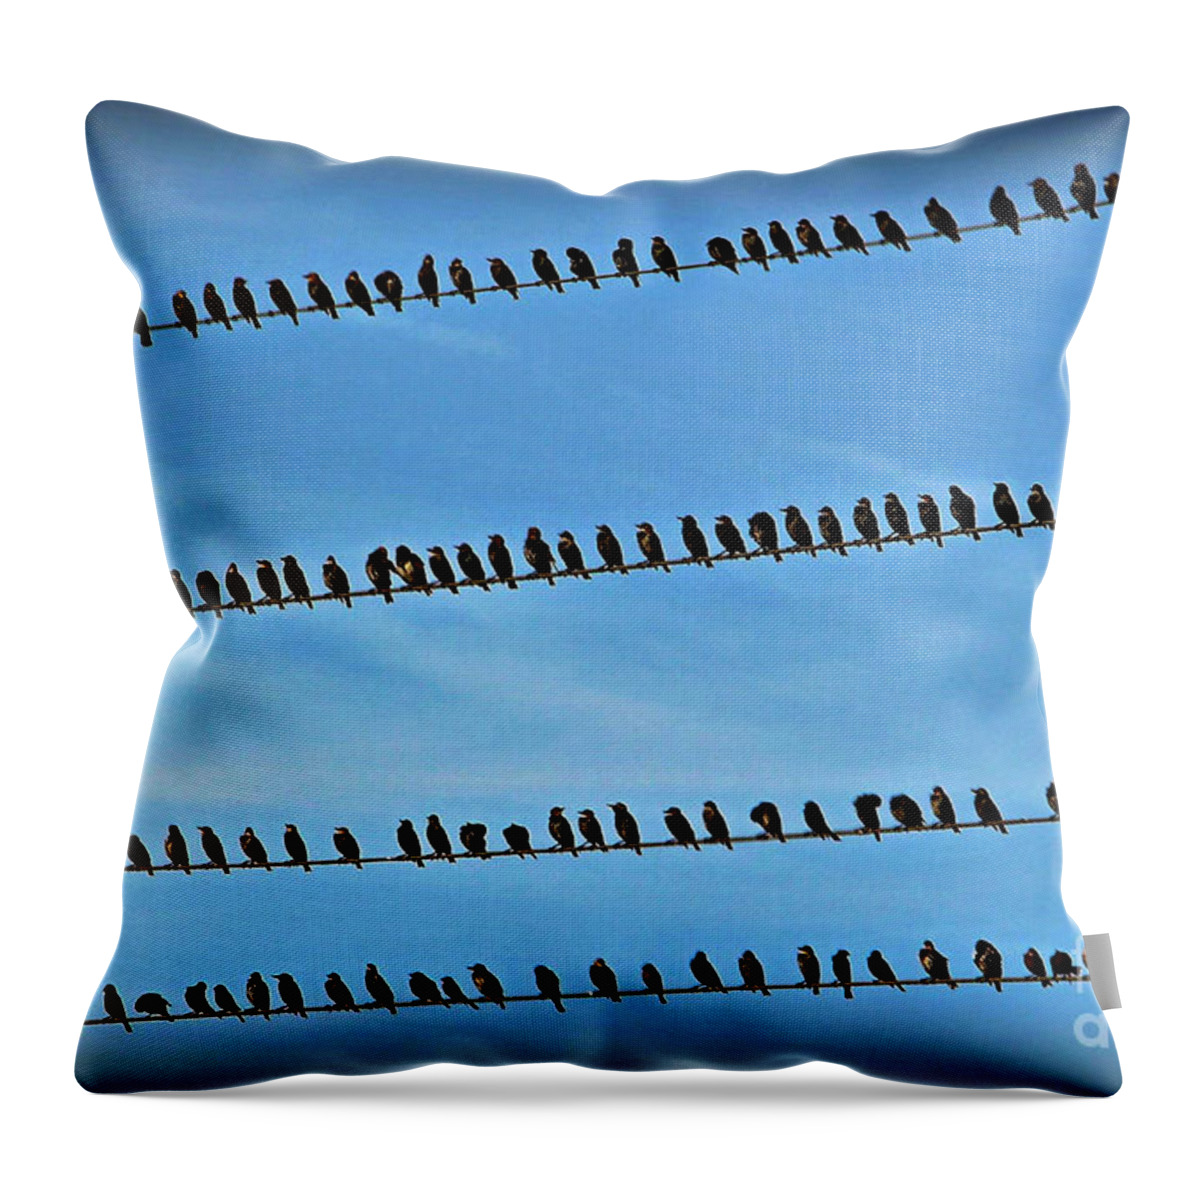 Online Birding Throw Pillow featuring the photograph Online Birding by Kathy M Krause